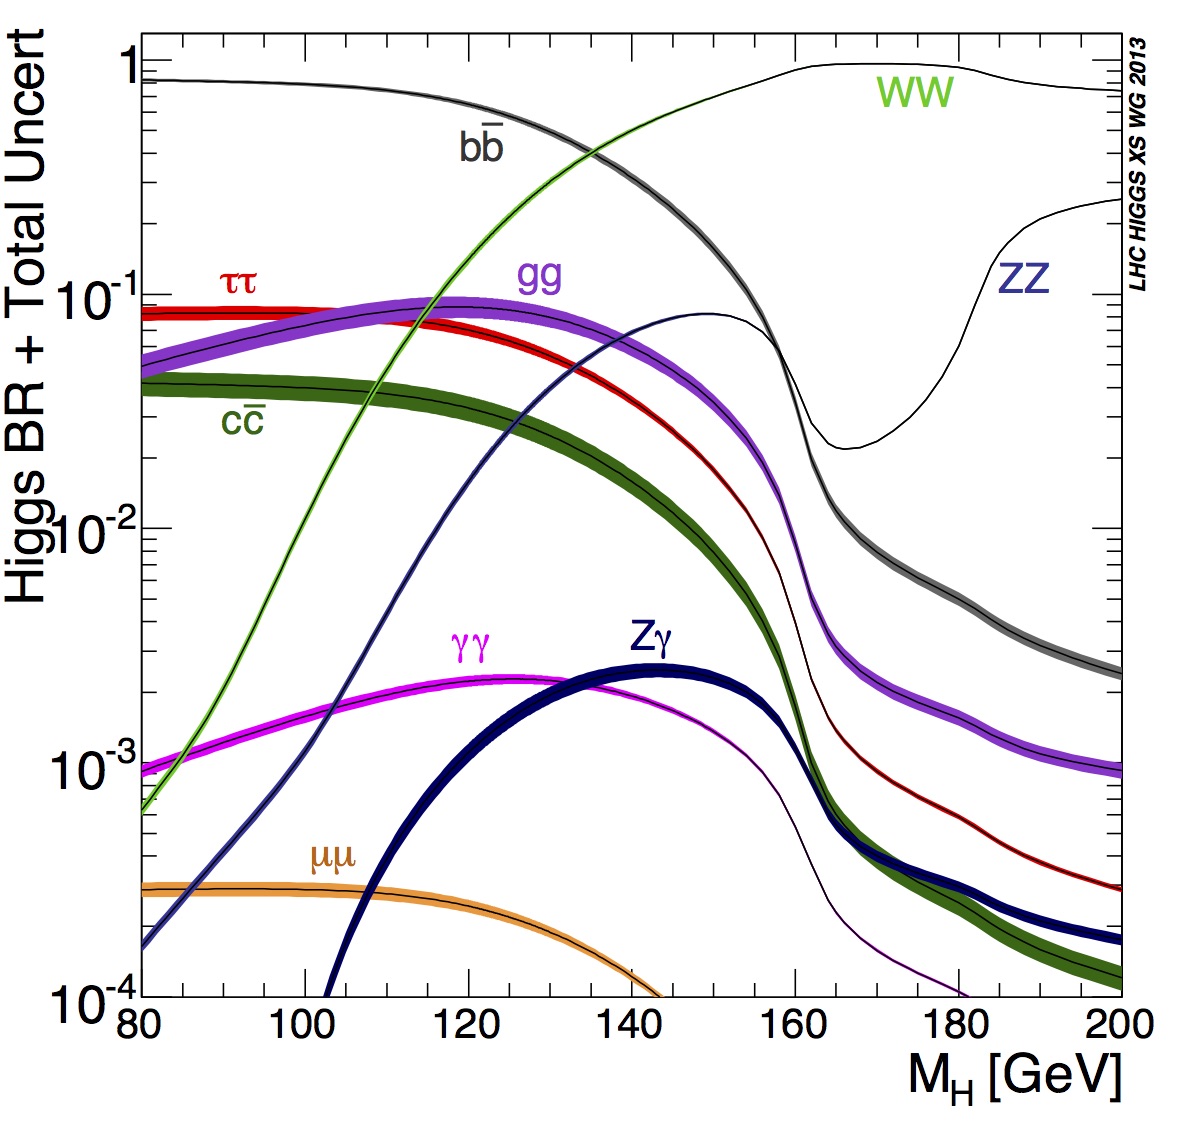 Decay modes change depending on the mass of the Higgs boson